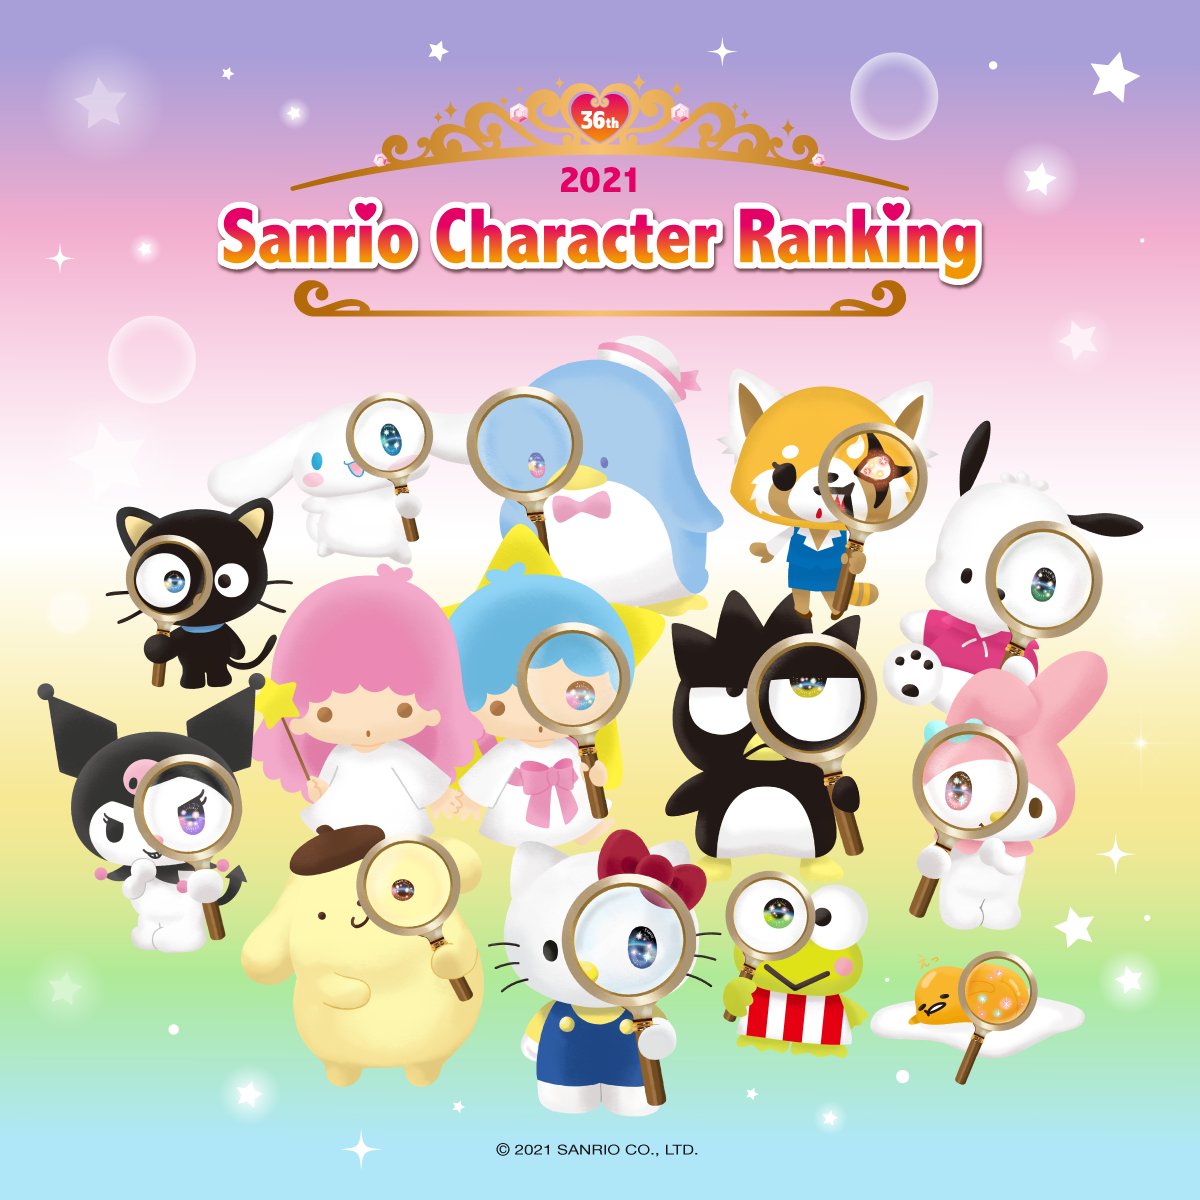 Sanrio on Twitter "Who are you voting for? 🏆💖 Starting today, visit